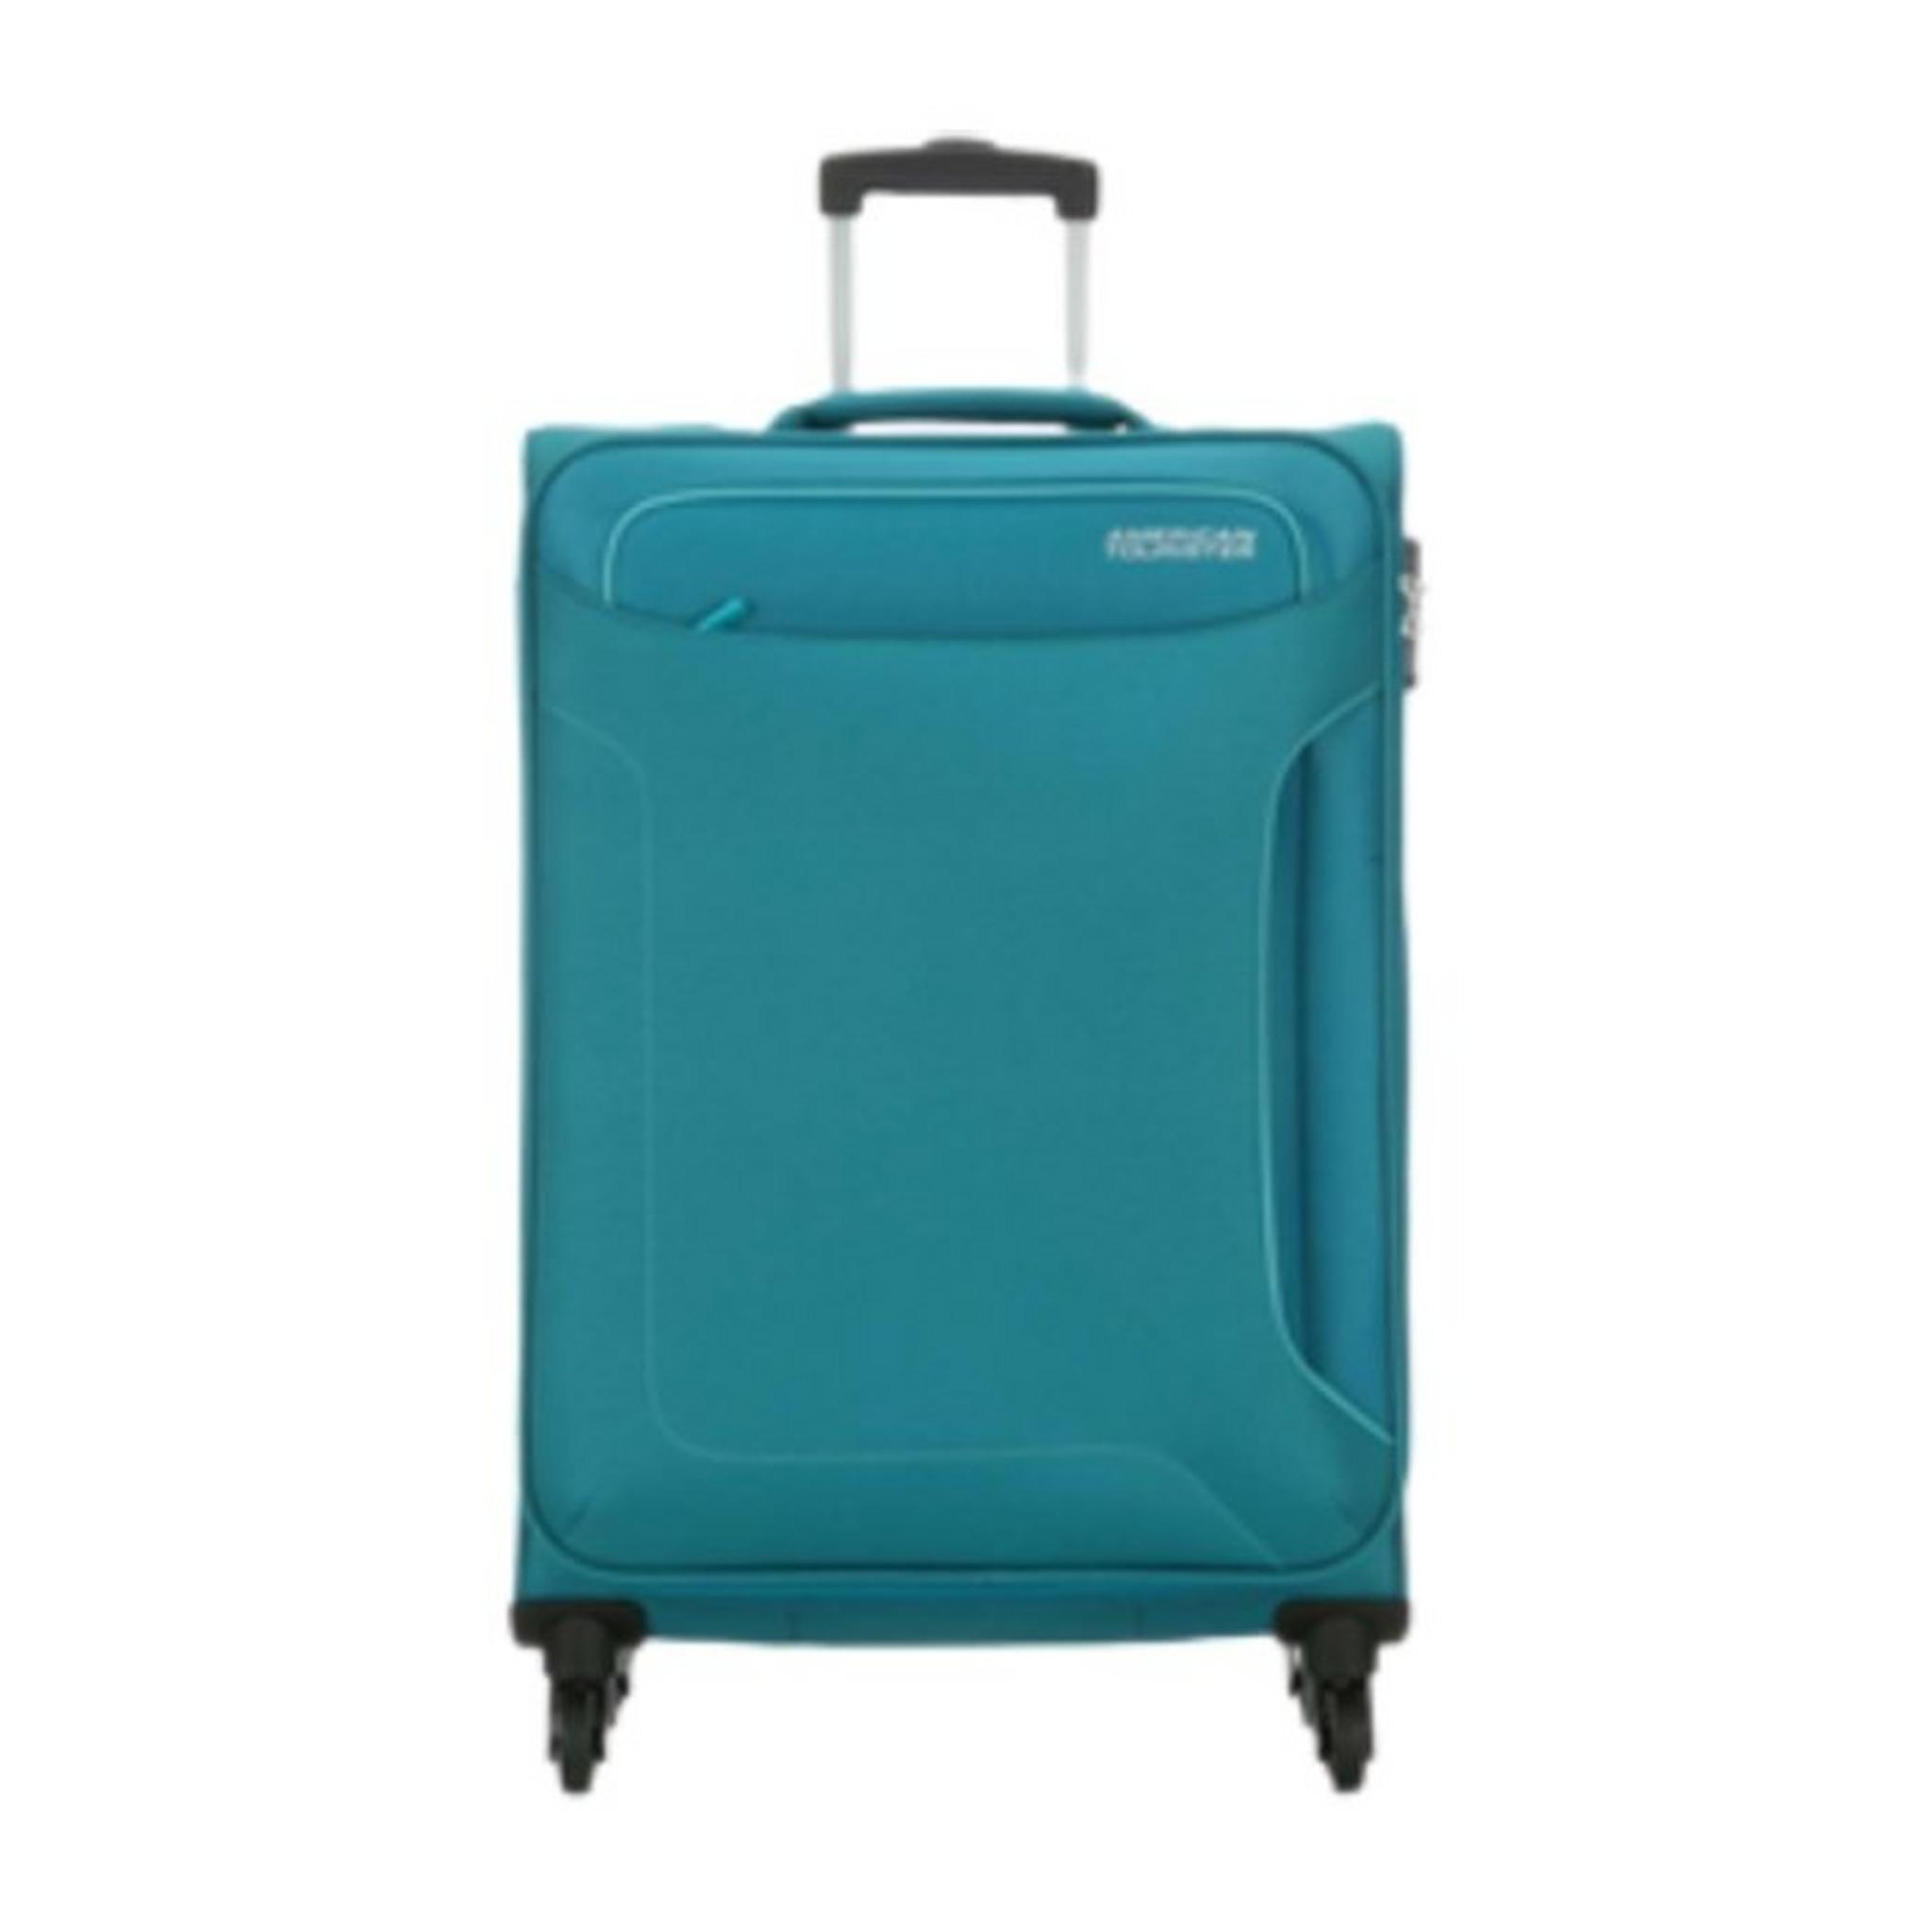 American Tourister Holiday Spinner Soft Luggage - 68CM Medium Size - Teal